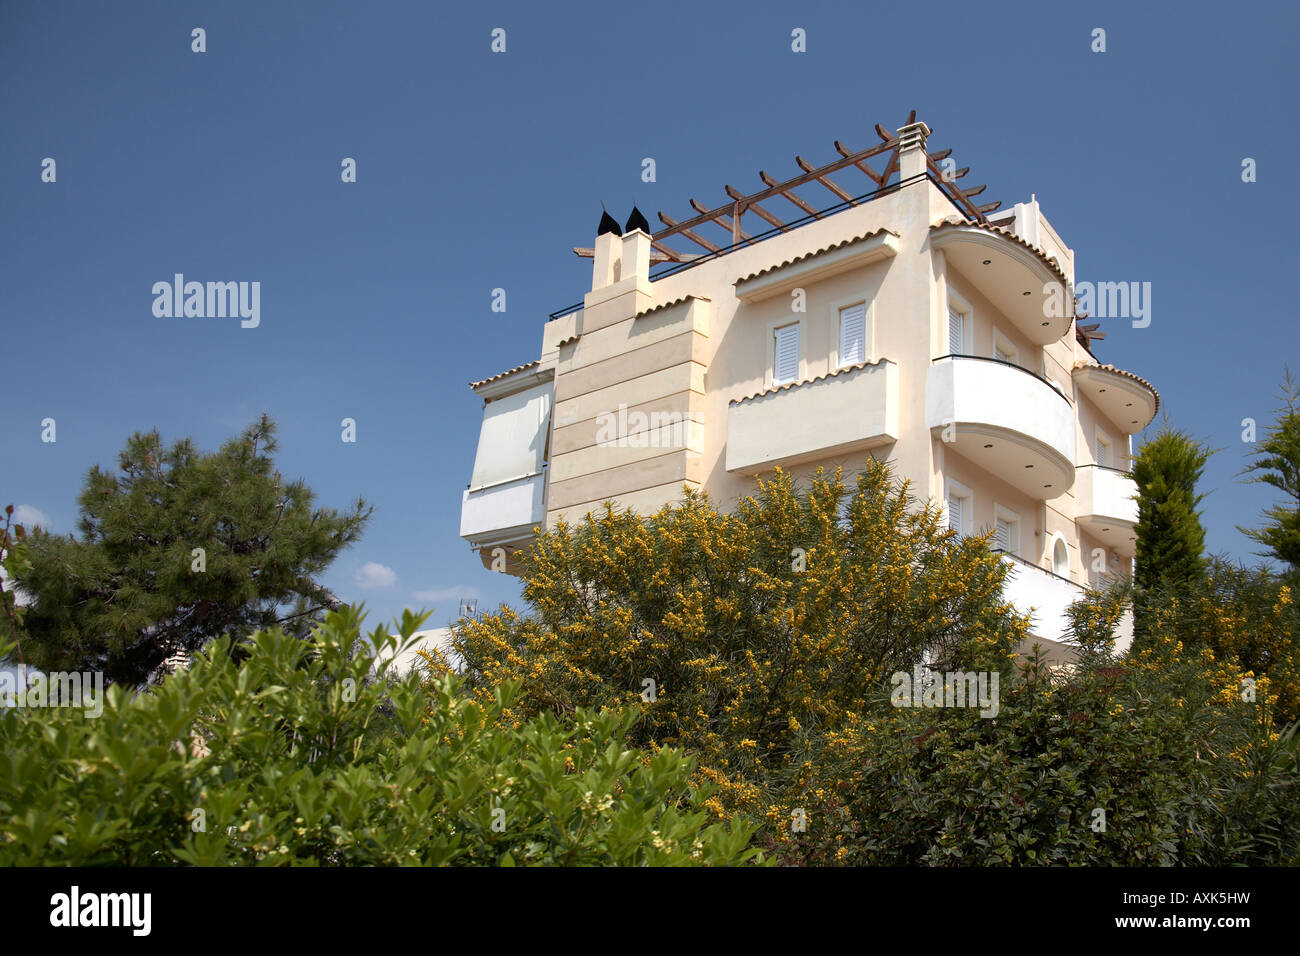 Modern architecture of house or appartment block of flats in Saronida Attica or Atiki Greece Stock Photo